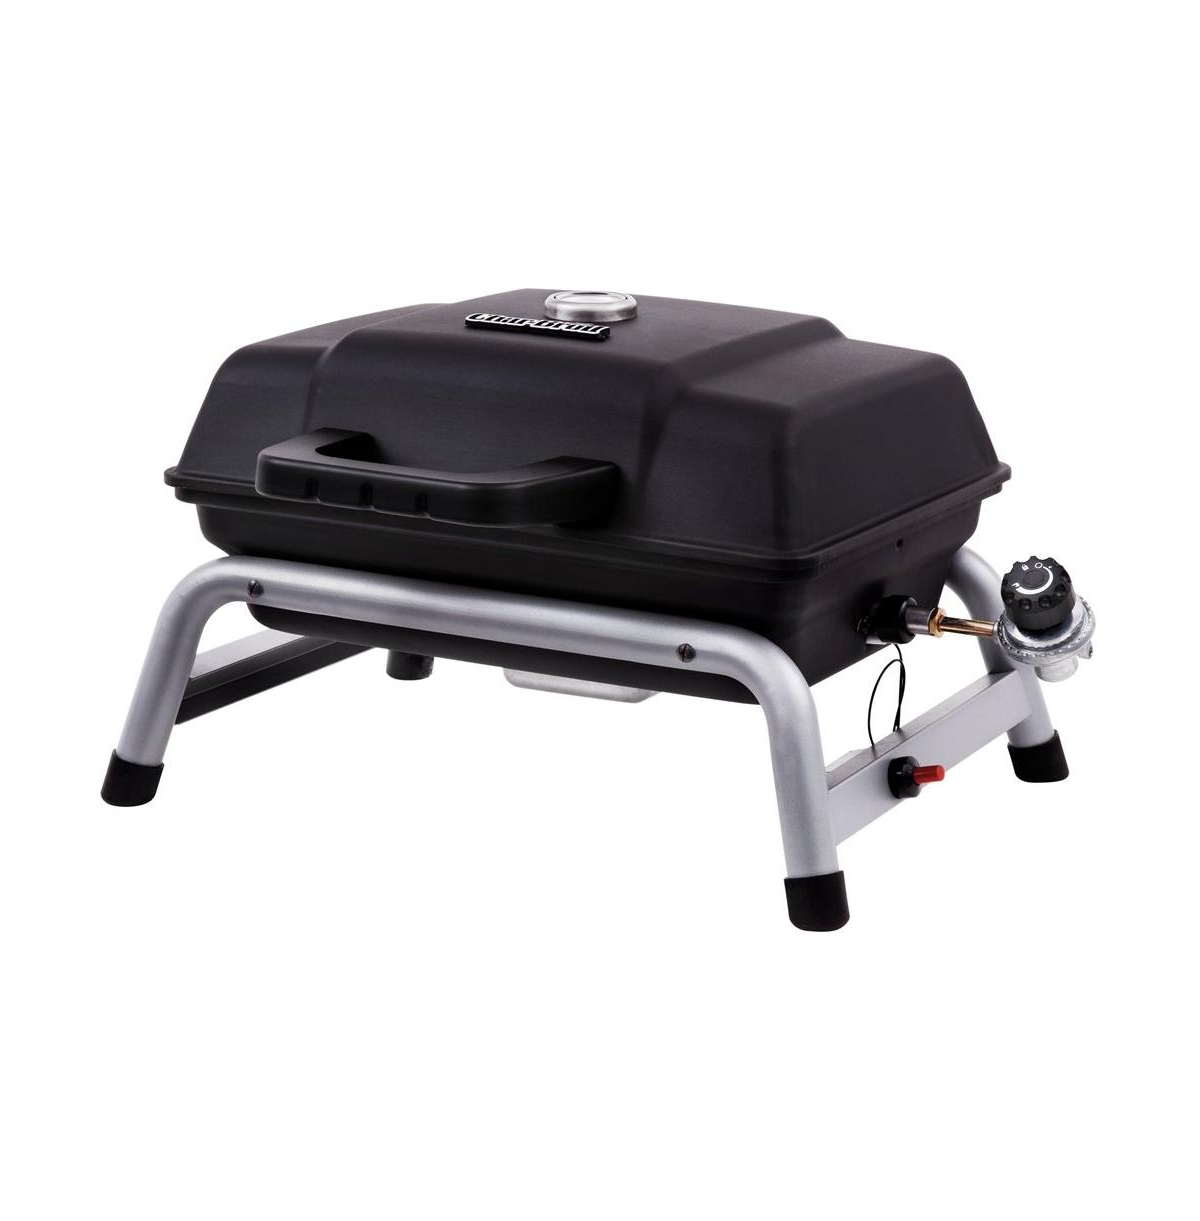 Char-Broil Portable Gas Grill 240 - Black